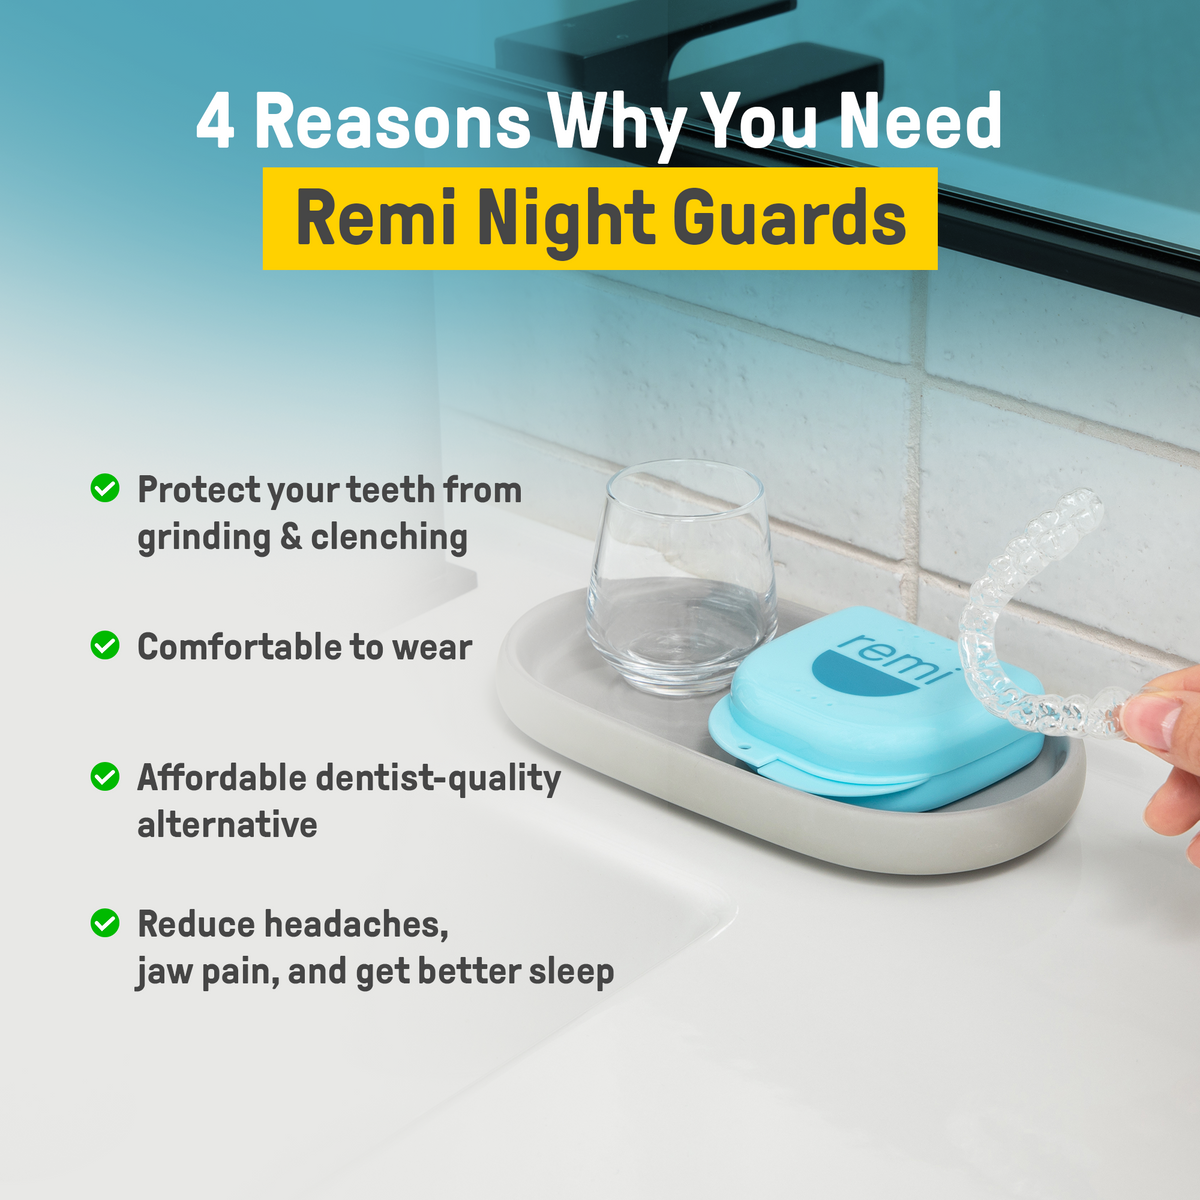 Image of Custom Night Guards with points: &quot;Protect your teeth from grinding &amp; clenching,&quot; &quot;Comfortable to wear,&quot; &quot;Affordable dental-grade quality alternative,&quot; and &quot;Reduce headaches, jaw pain, and get better sleep.